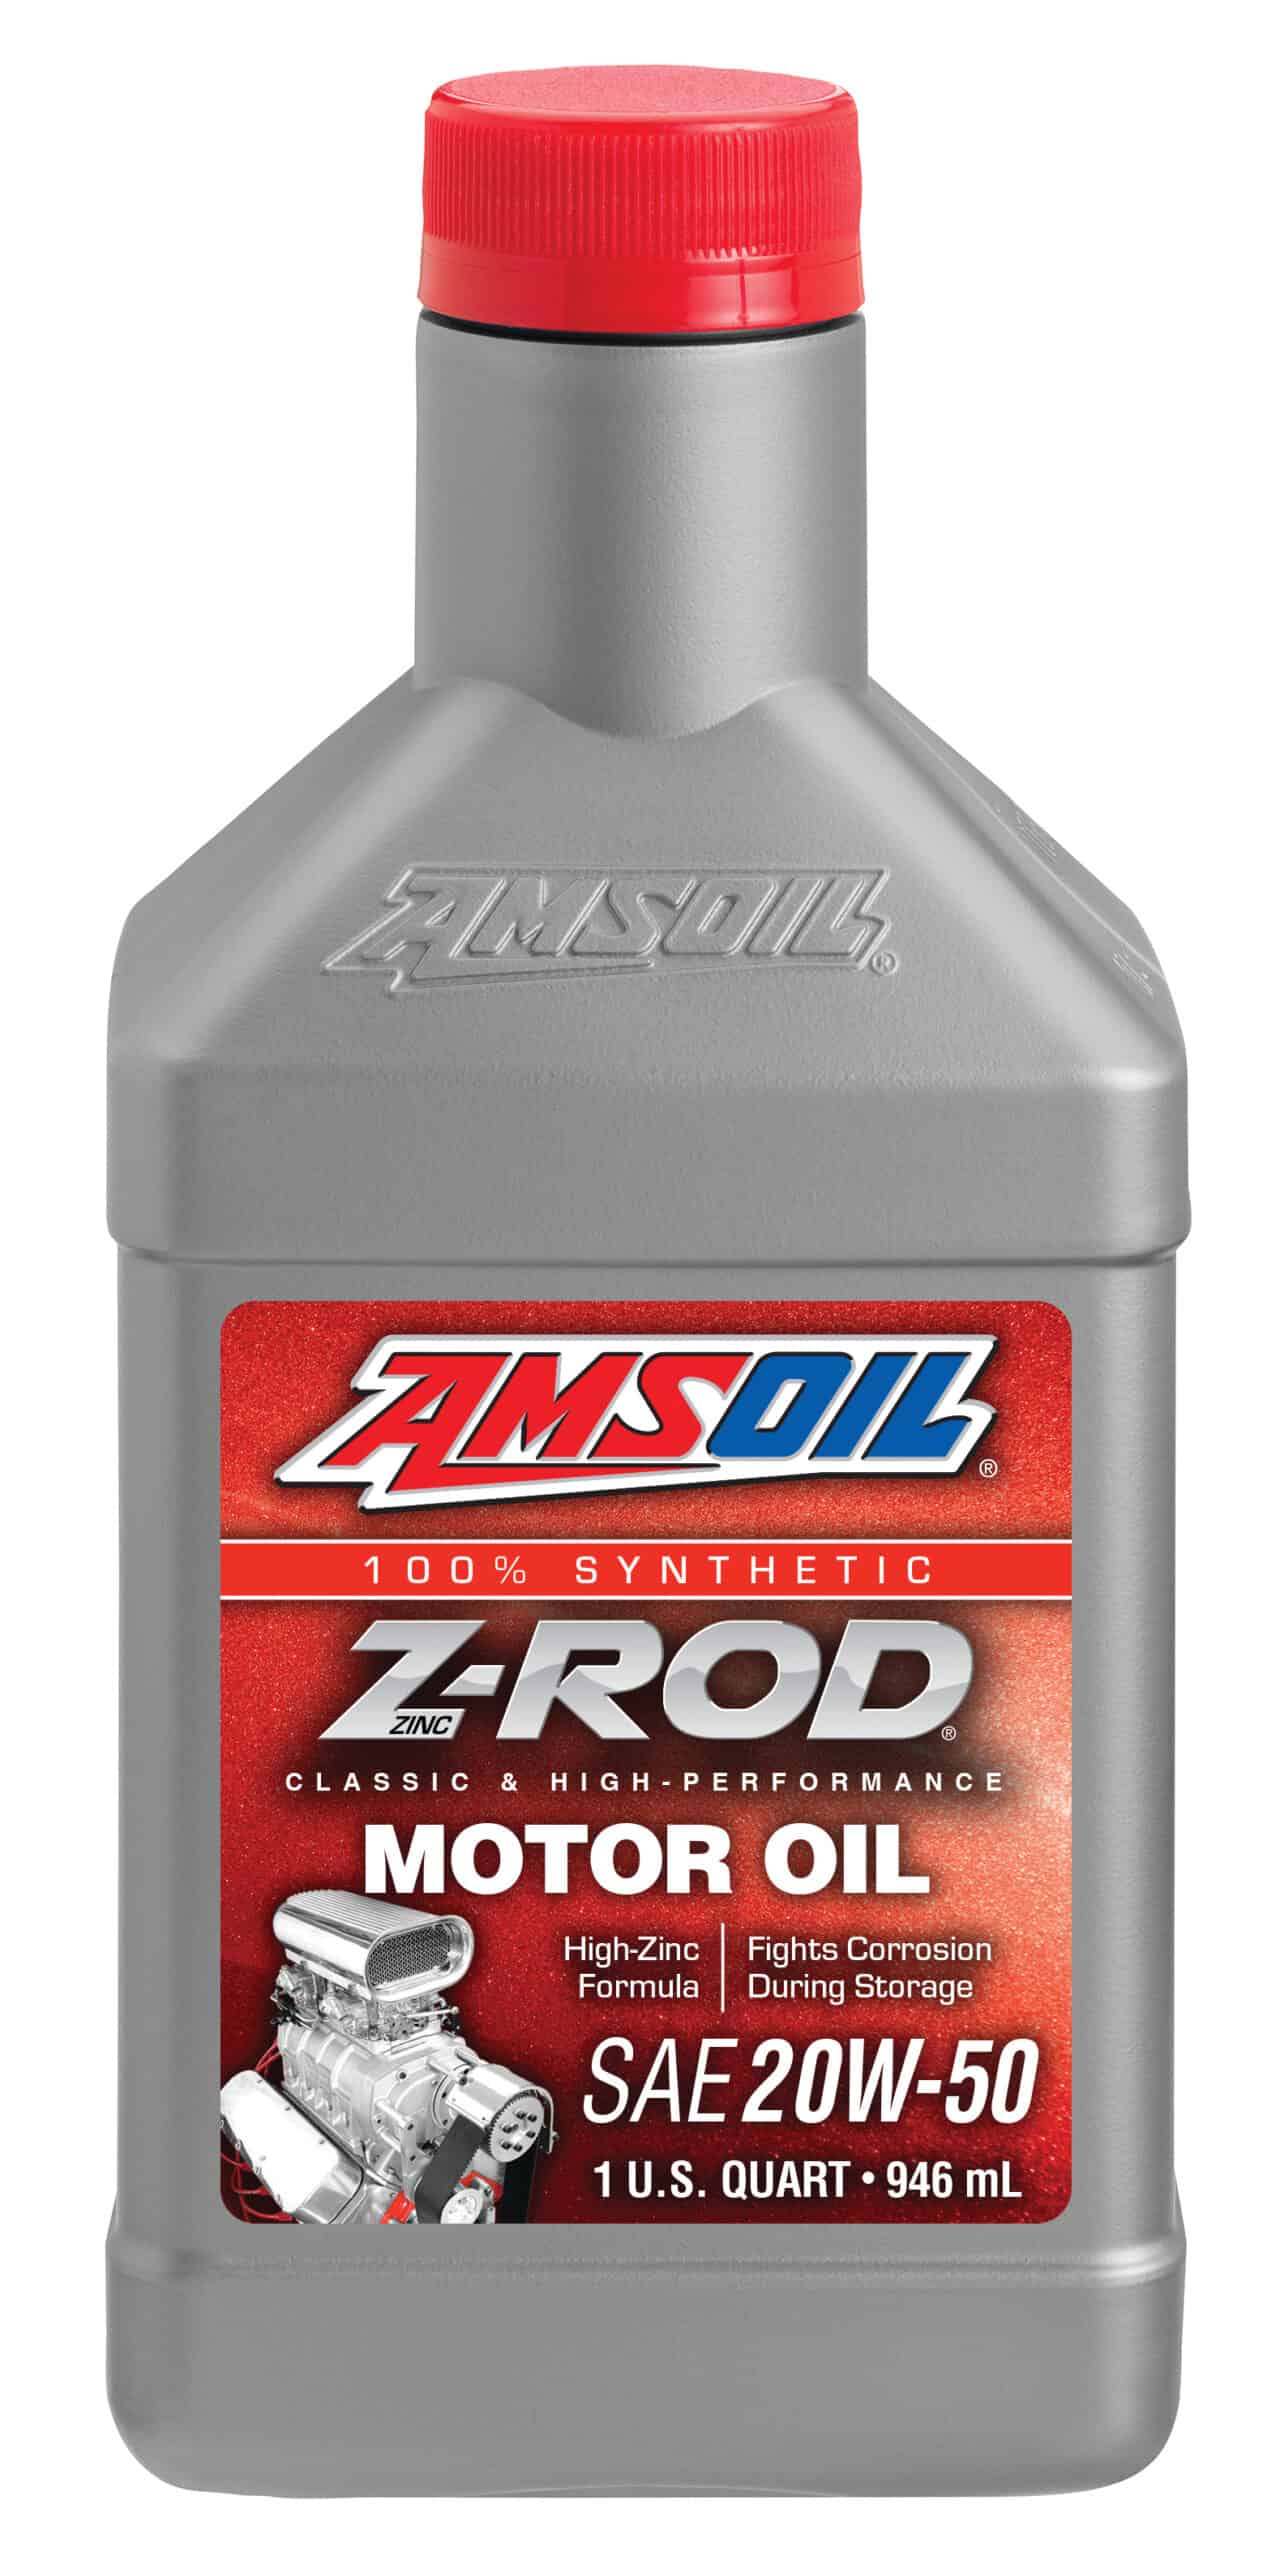 A bottle of AMSOIL Z-ROD® Synthetic Motor Oil, formulated to prevent wear on flat-tappet camshafts and other critical engine components.